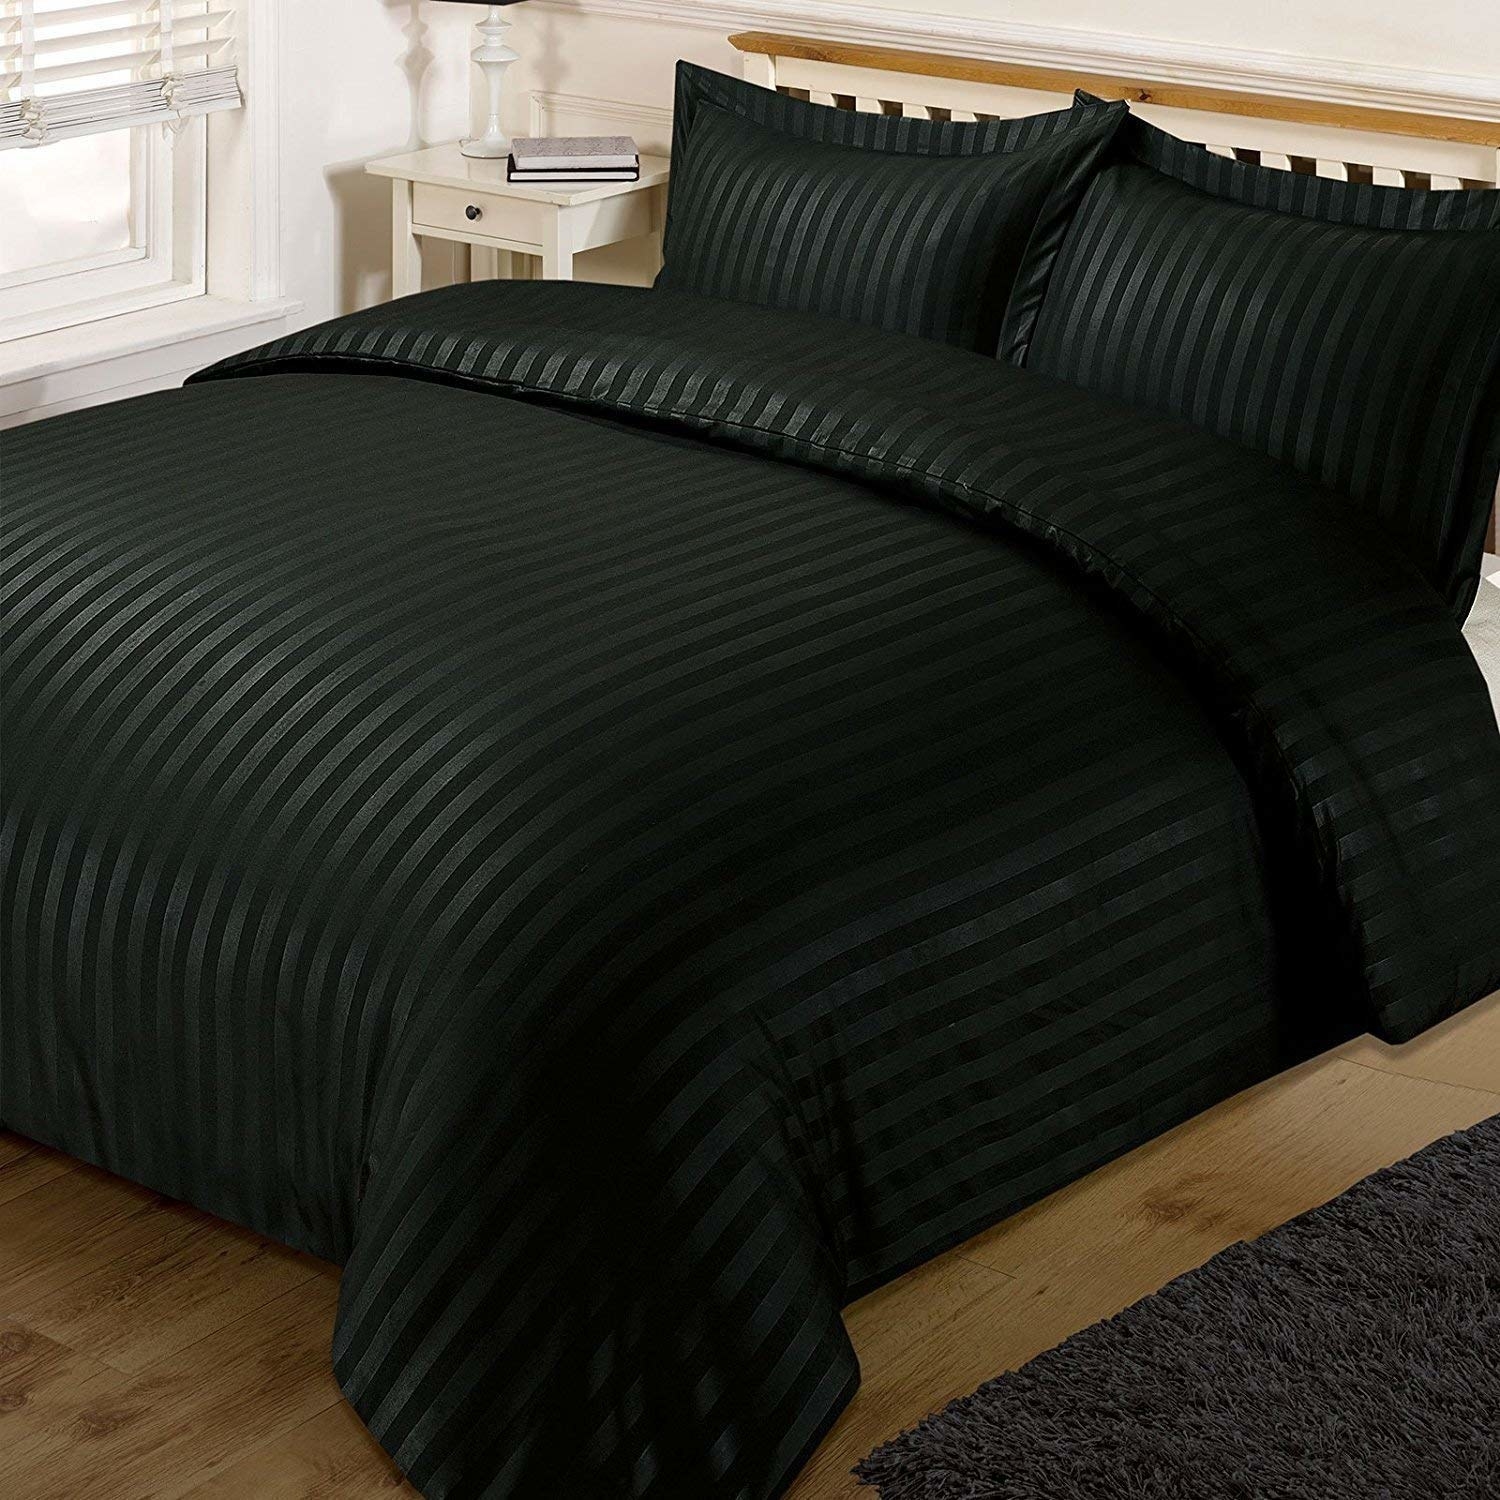 Black stain bedsheets with stripes pictured on a bed.